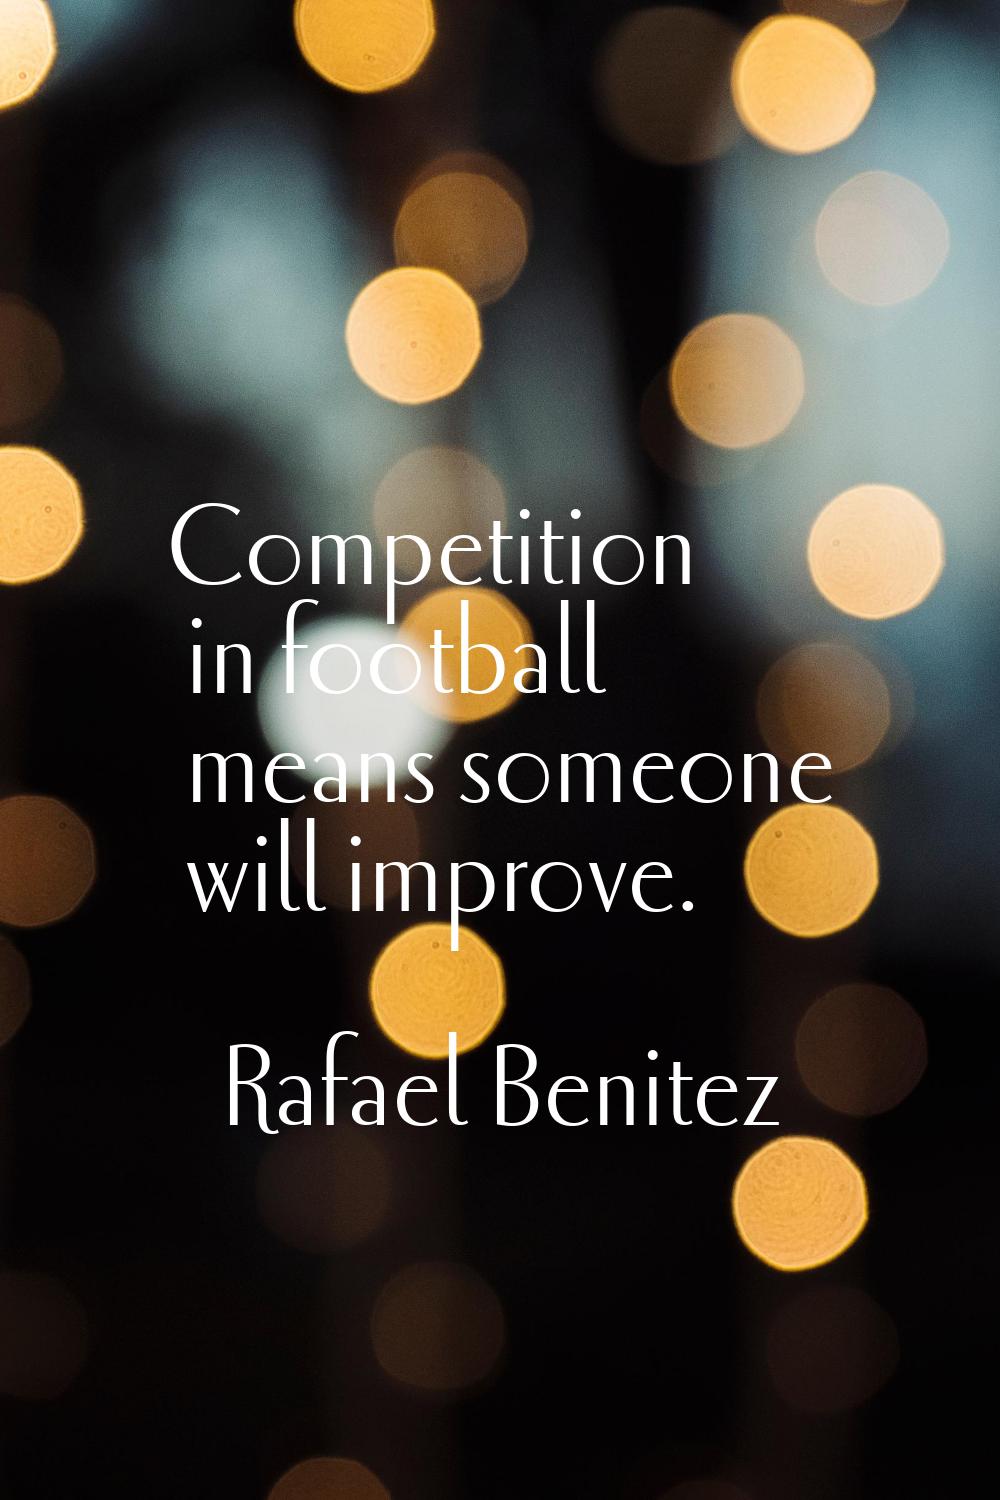 Competition in football means someone will improve.